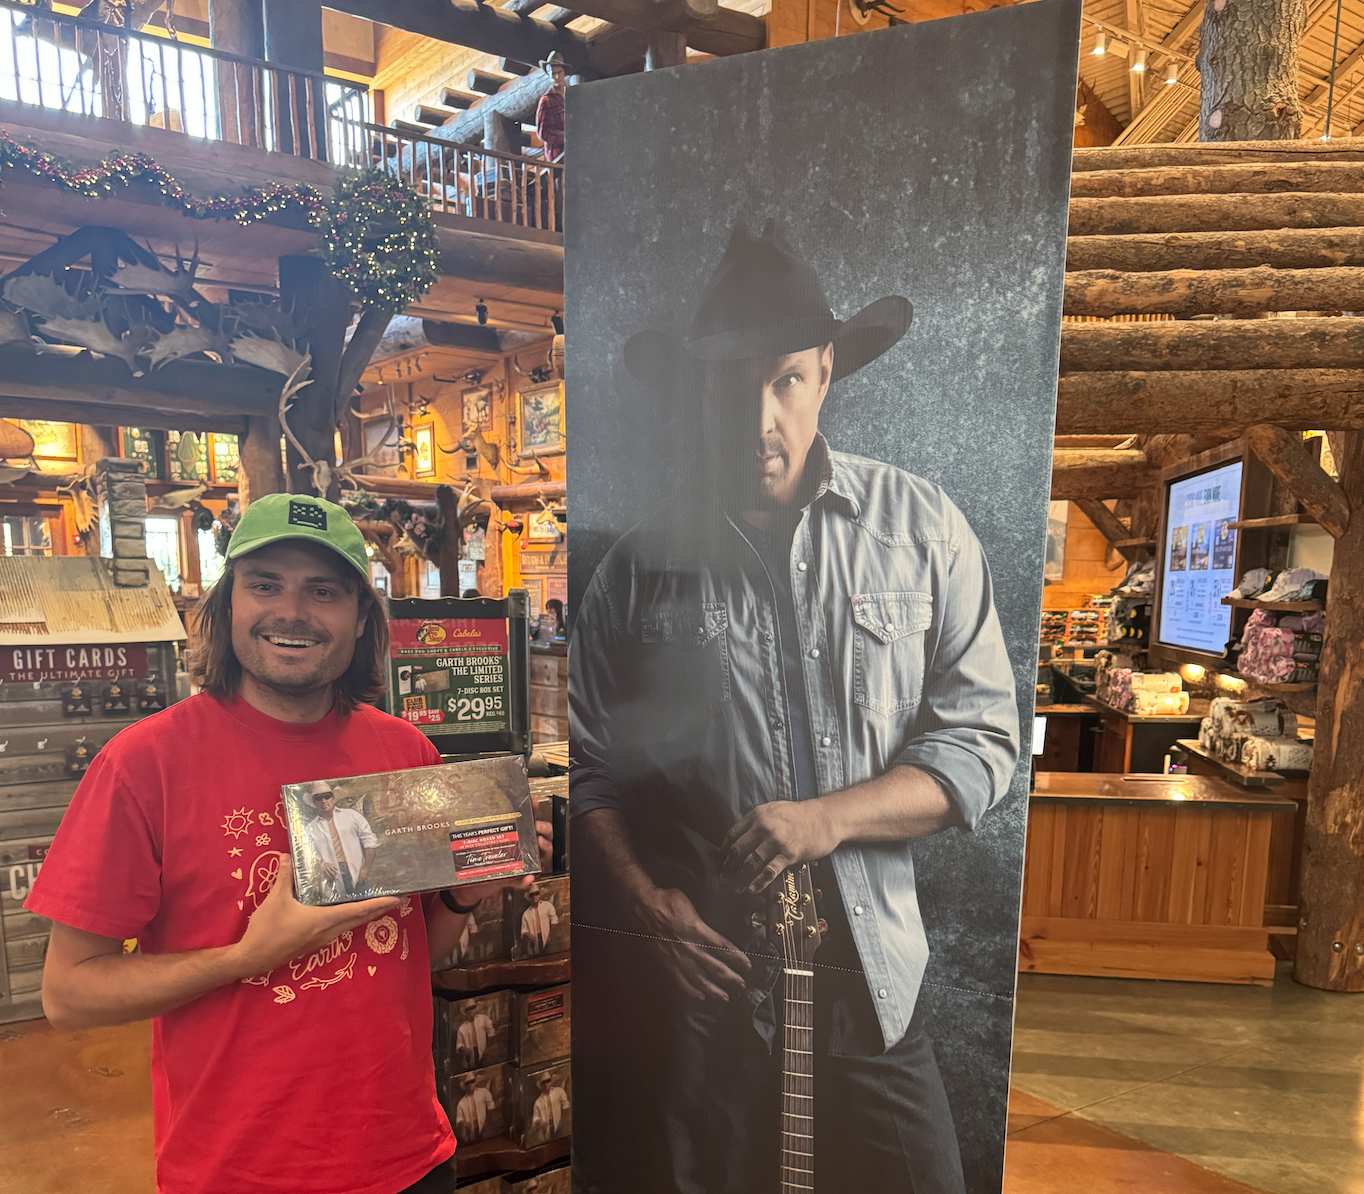 Garth Brooks' New, Bass Pro Shops-Exclusive CD: The 404 Media Review